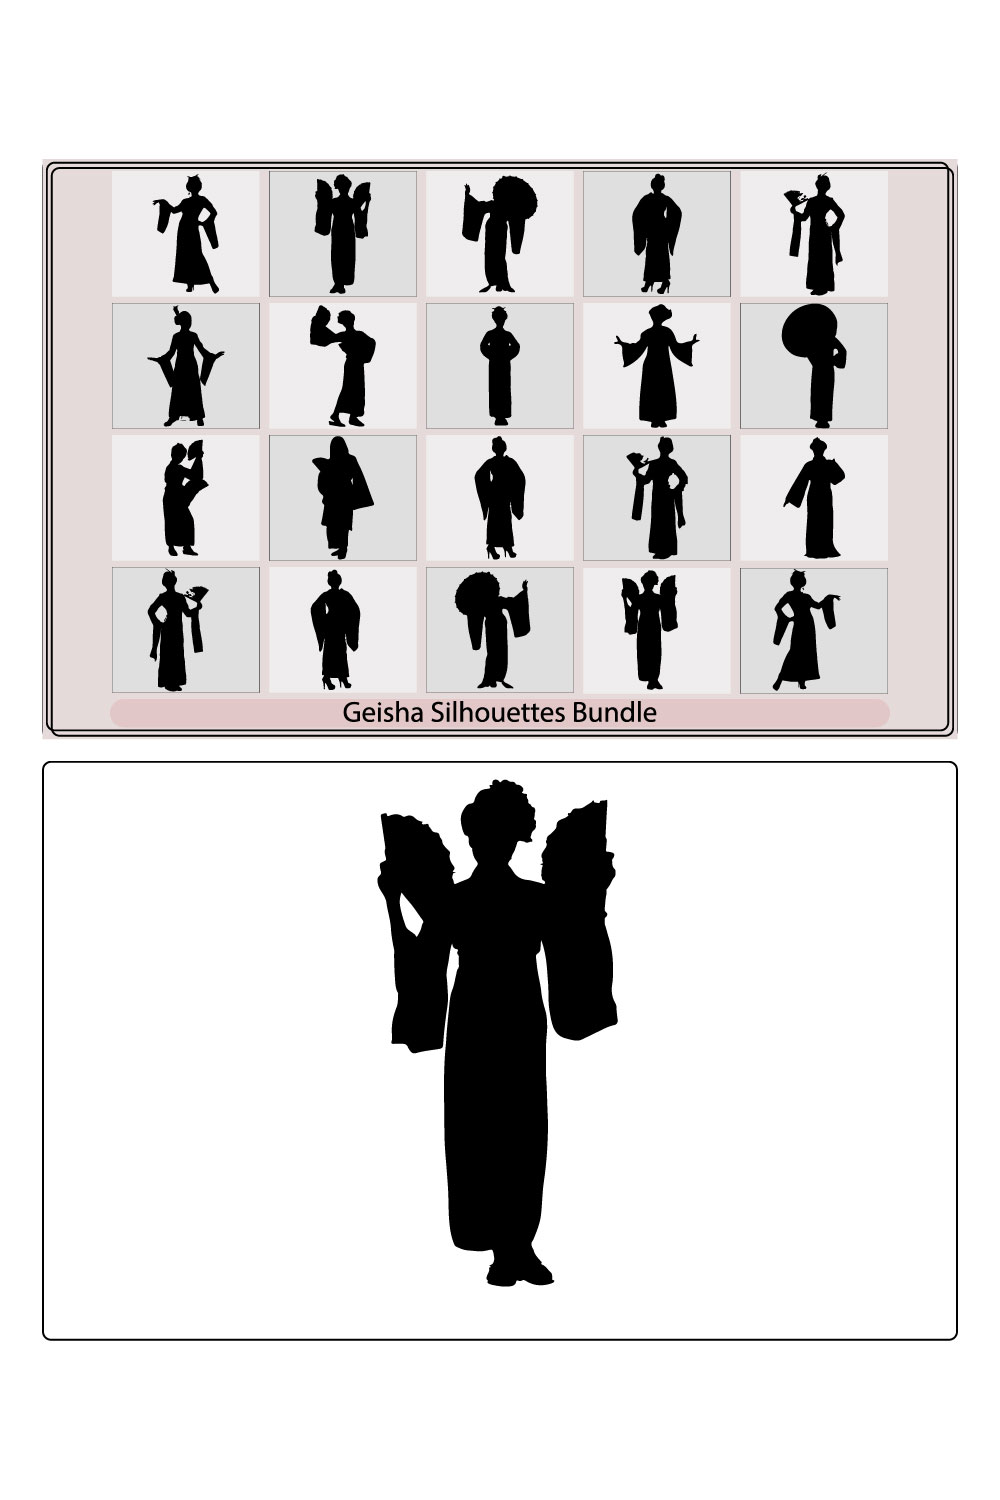 Japanese Geisha silhouette Idea for a tattoo Vector illustration,Japanese woman in kimono,geisha, Silhouette of a geisha and stem of bamboo pinterest preview image.